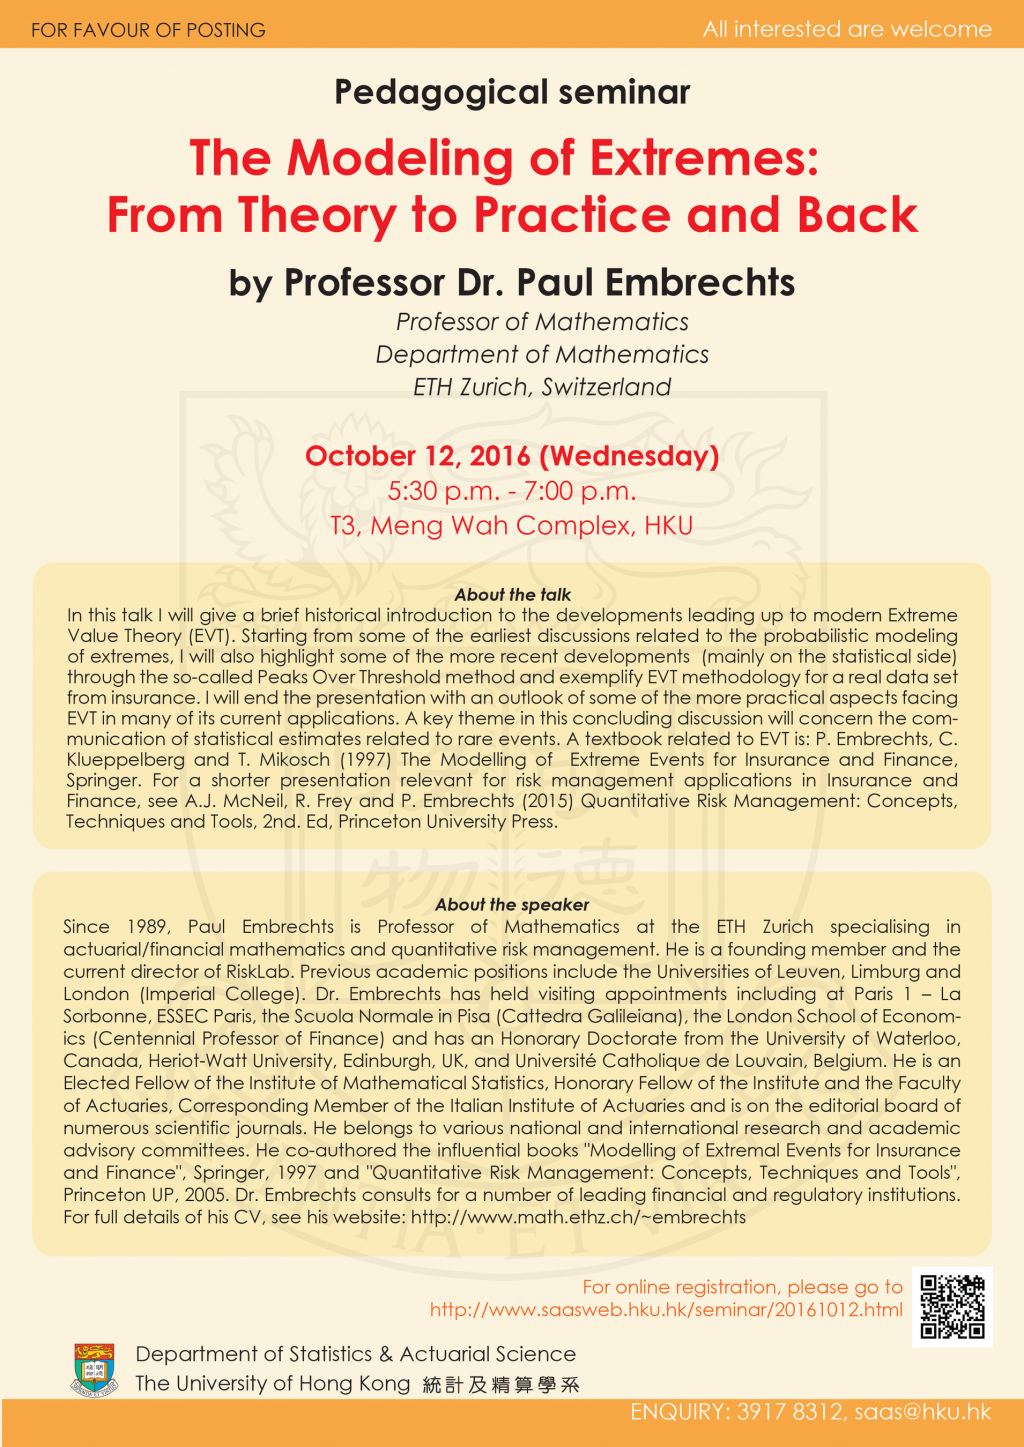 Pedagogical seminar on 'The Modeling of Extremes: From Theory to Practice and Back' by Professor Dr. Paul Embrechts  on Wed, Oct 12, 2016.